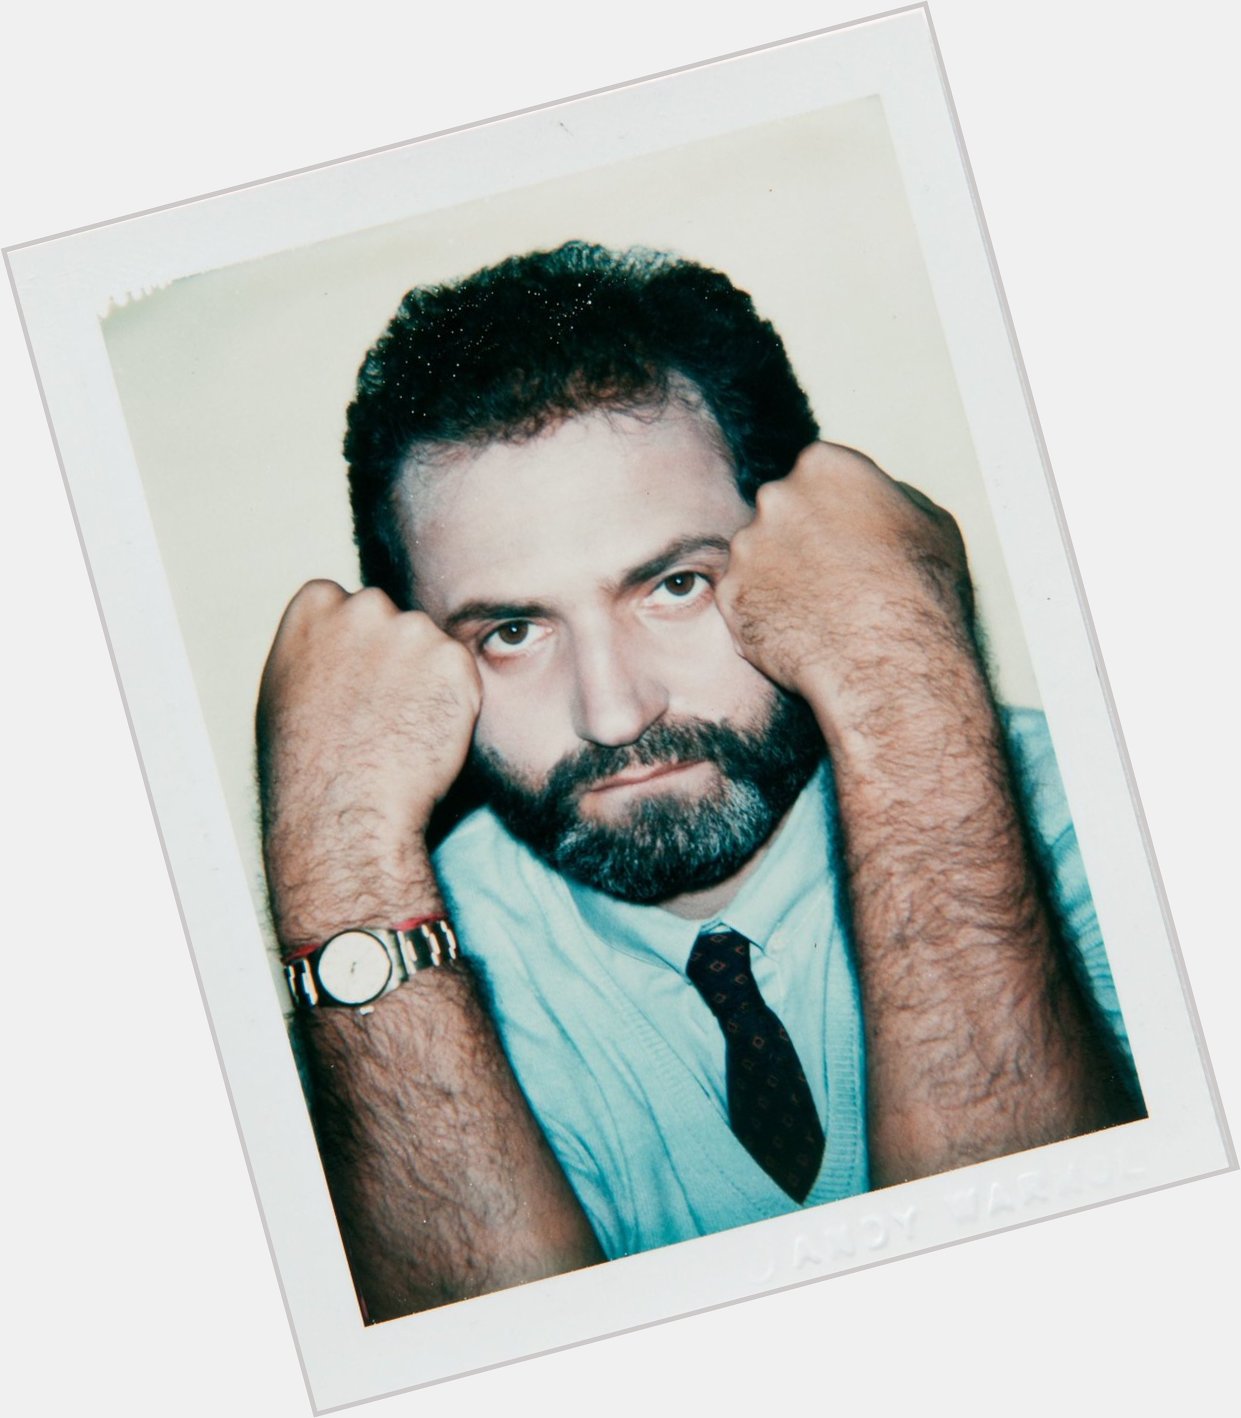 Happy birthday to the legend and a timeless inspiration in fashion, gianni versace 